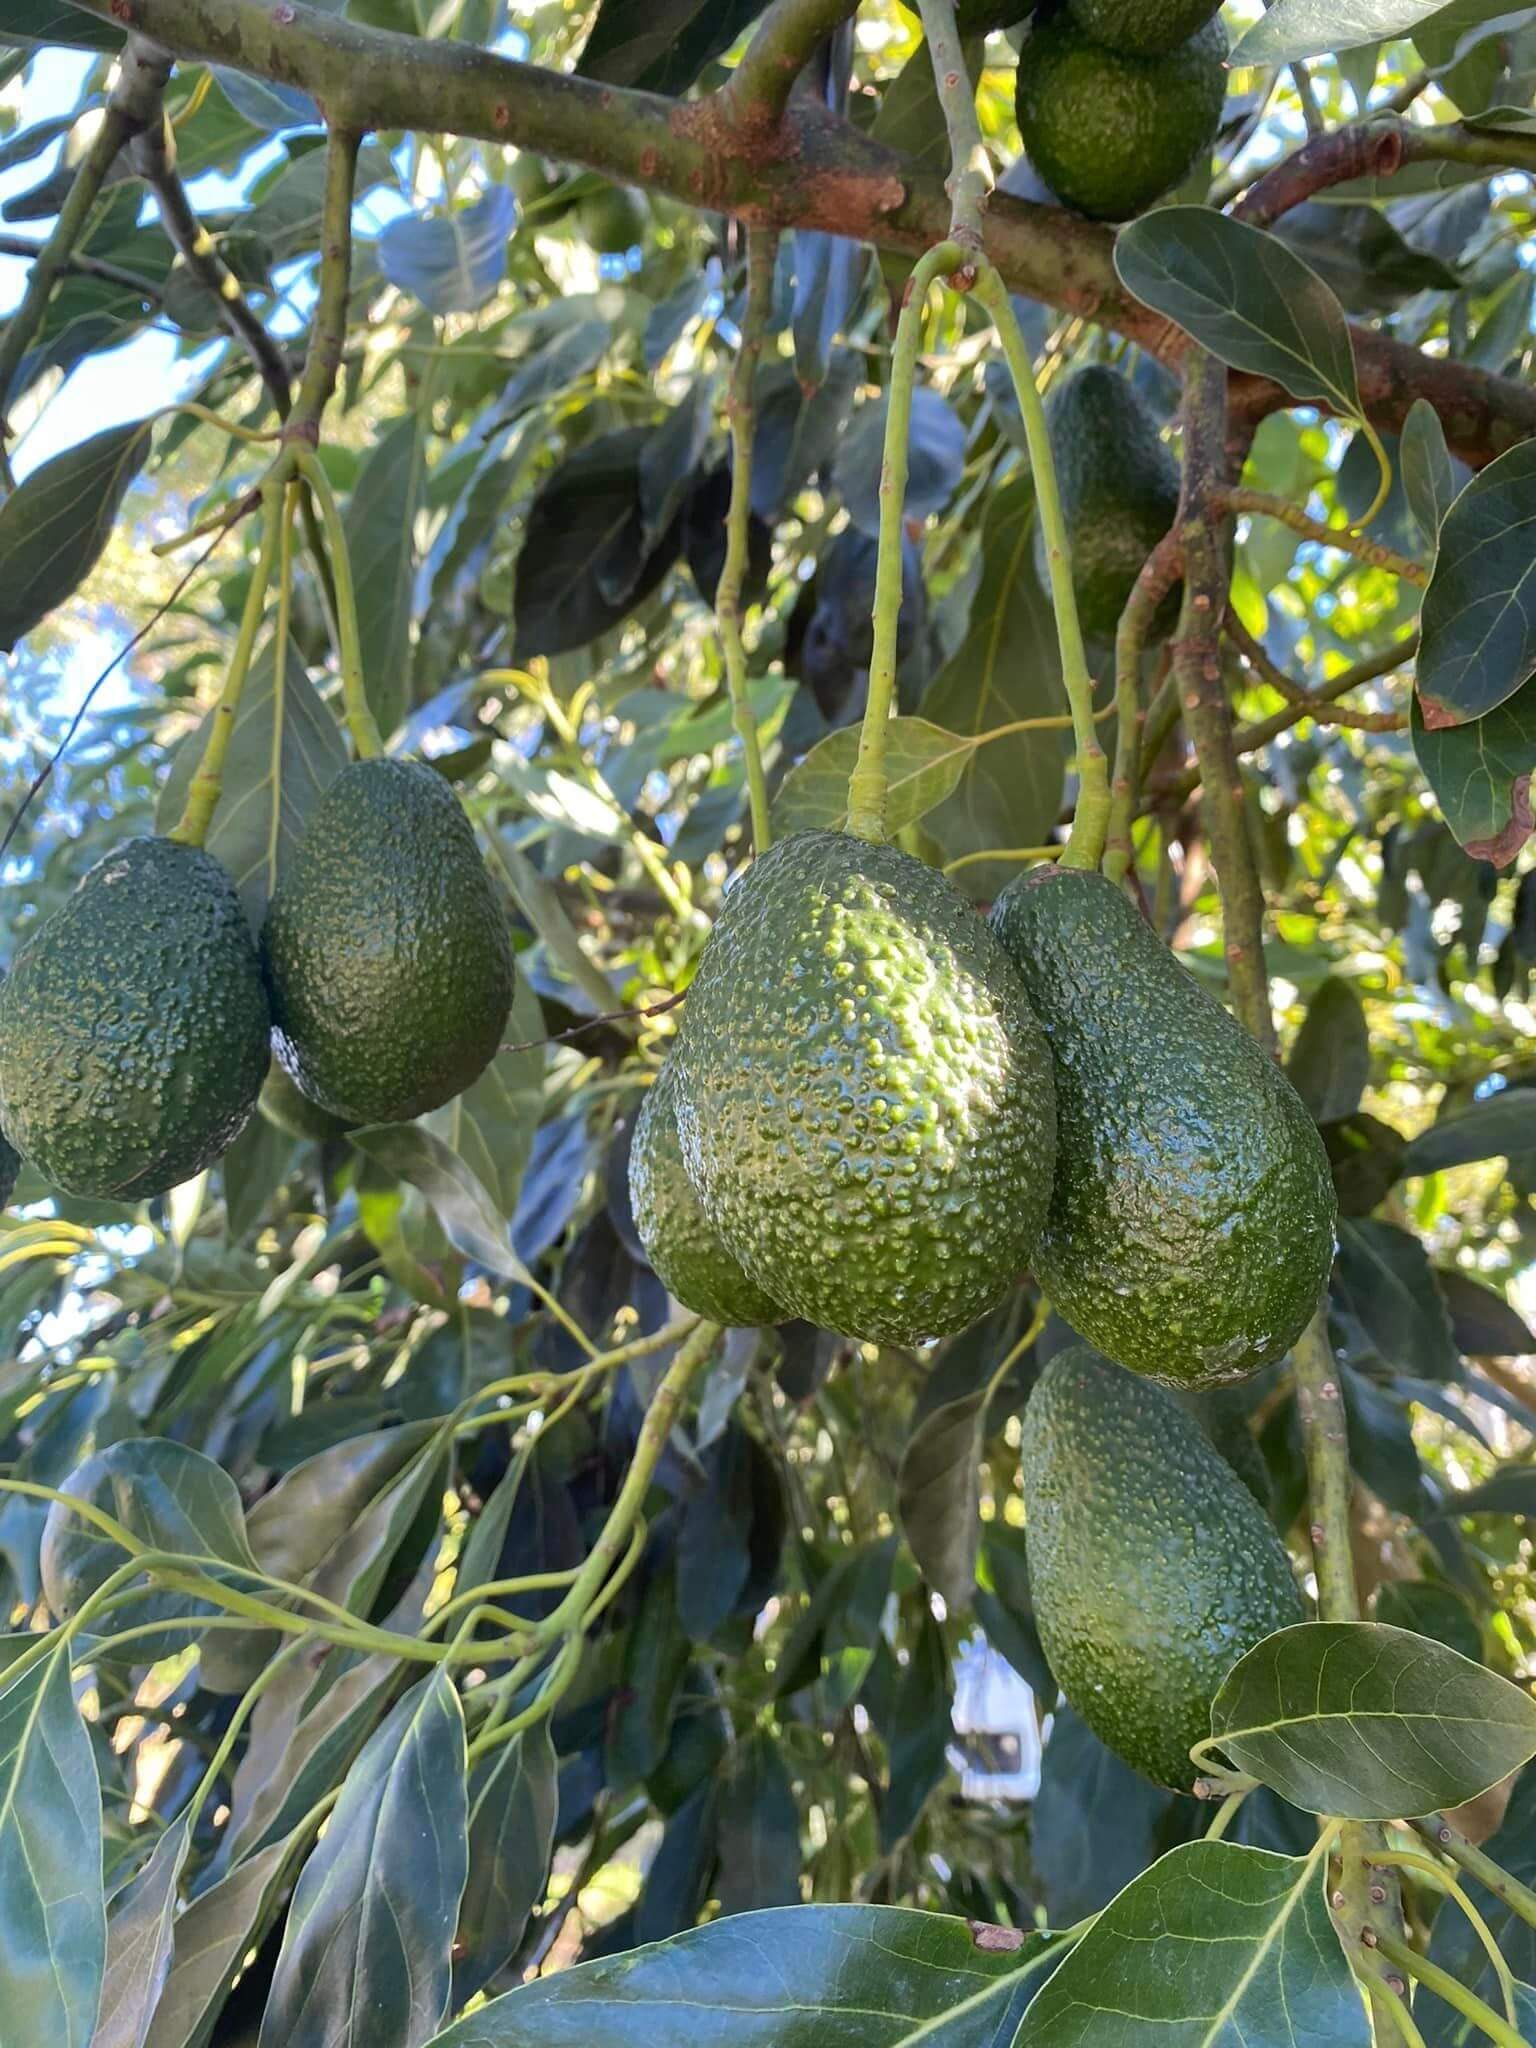 Avocados growing in a tree